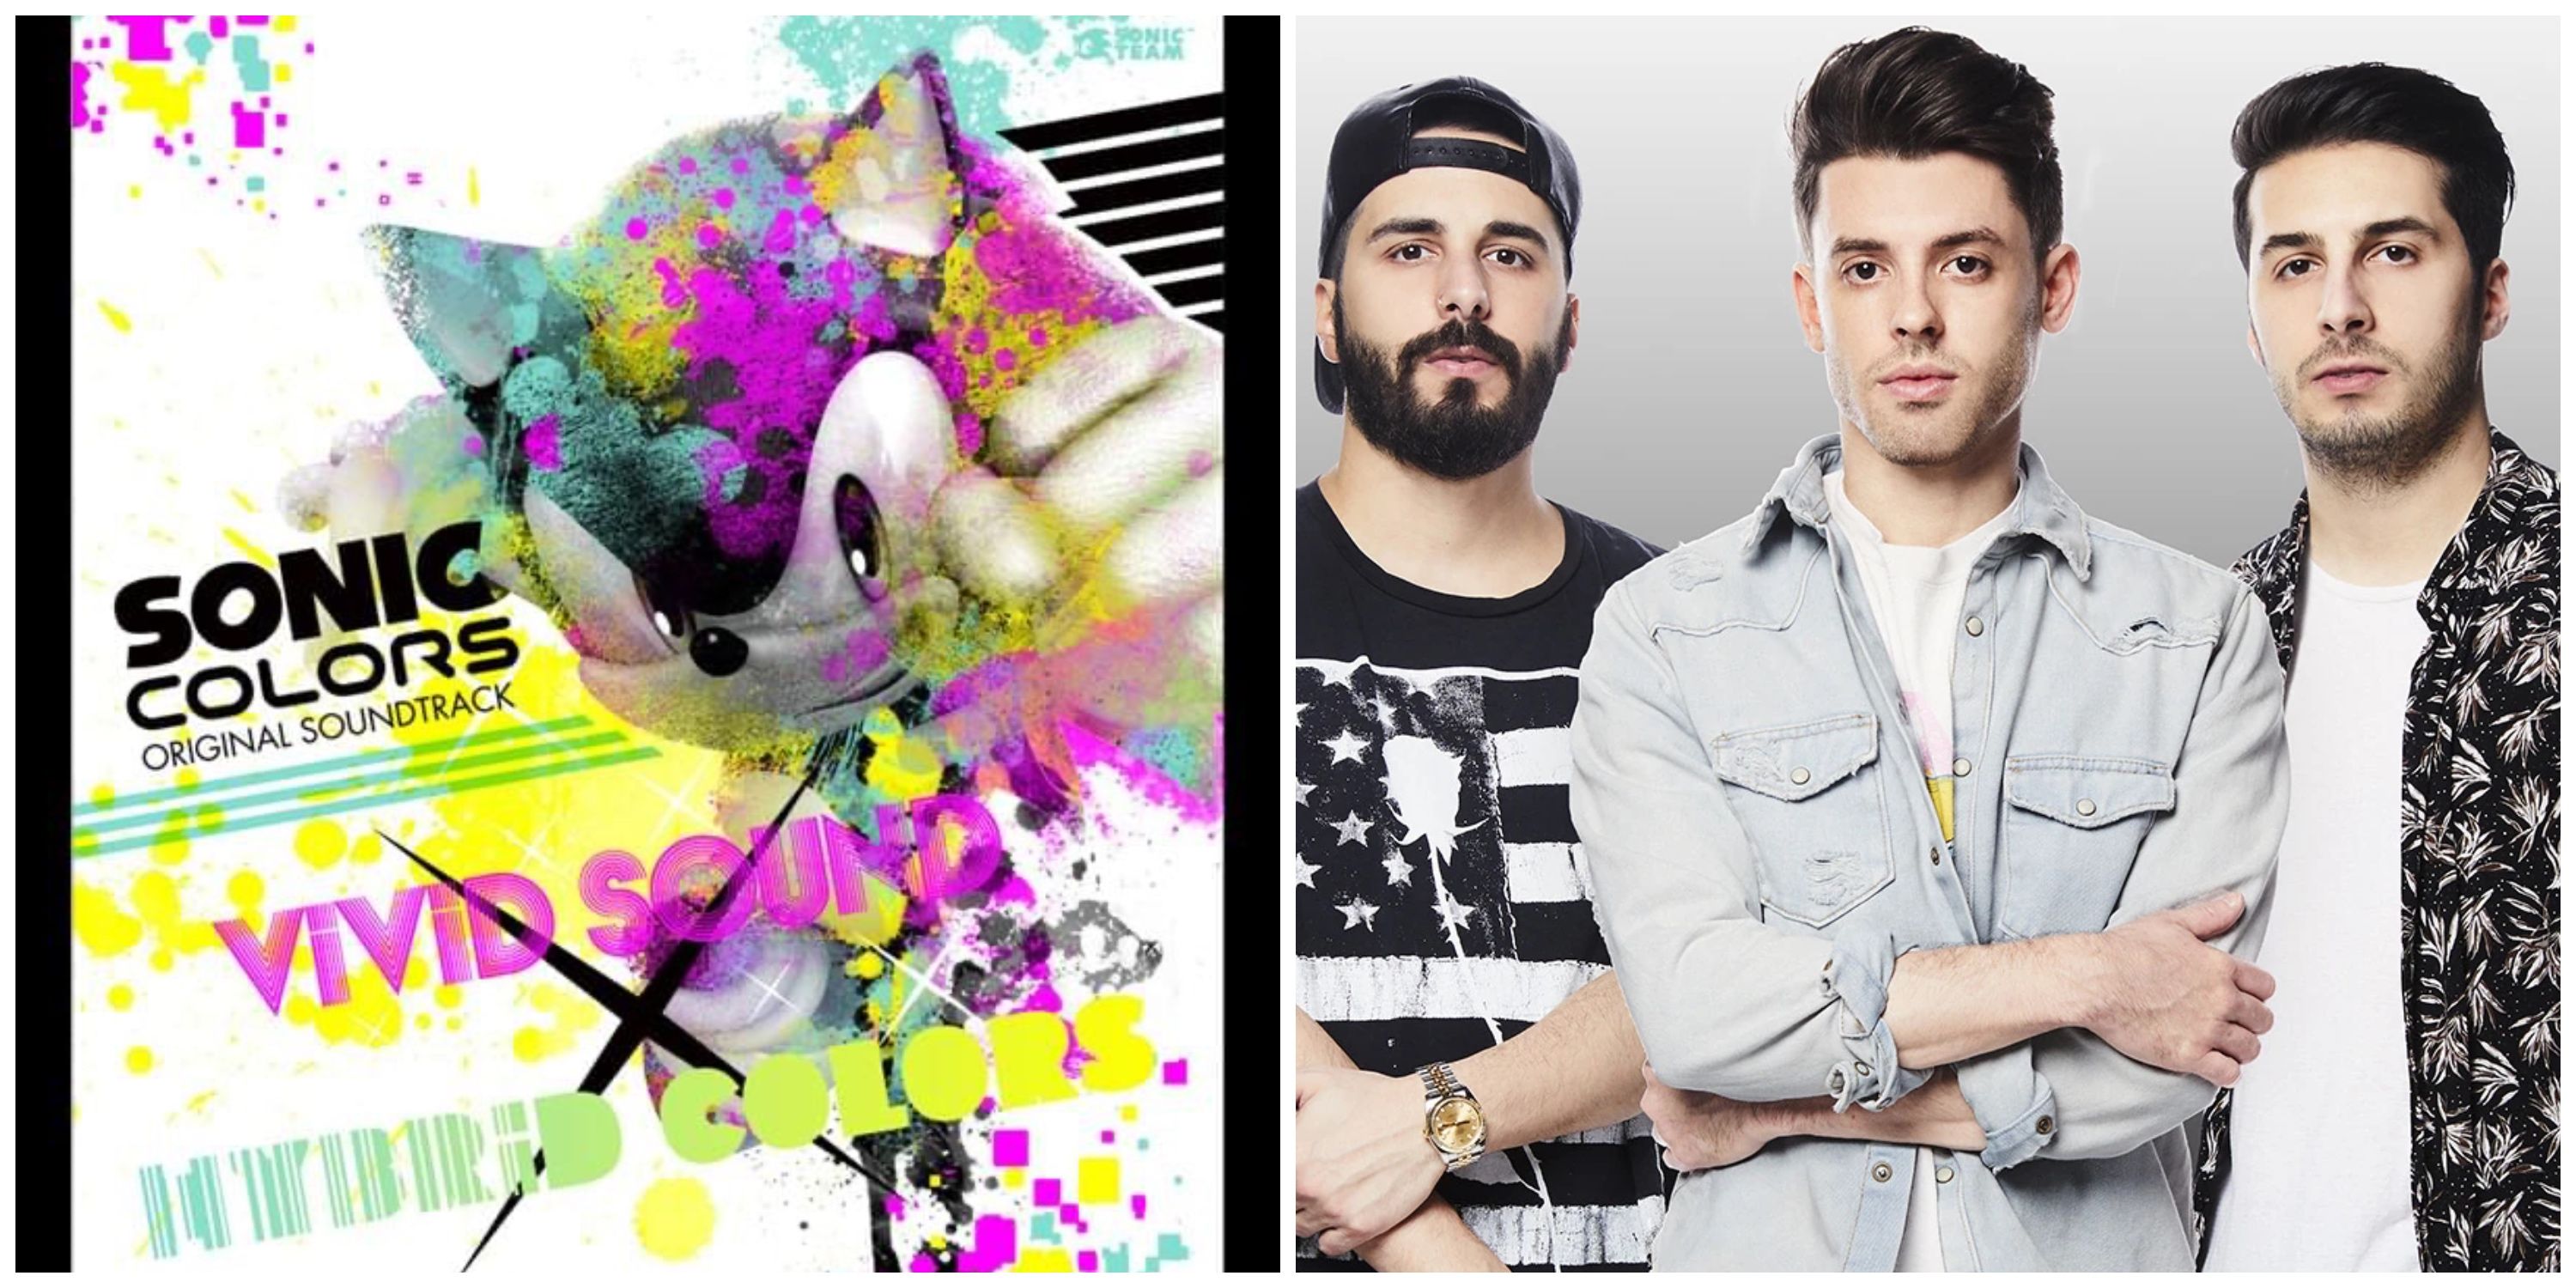 Sonic colors album cover, and Cash Cash band side by side